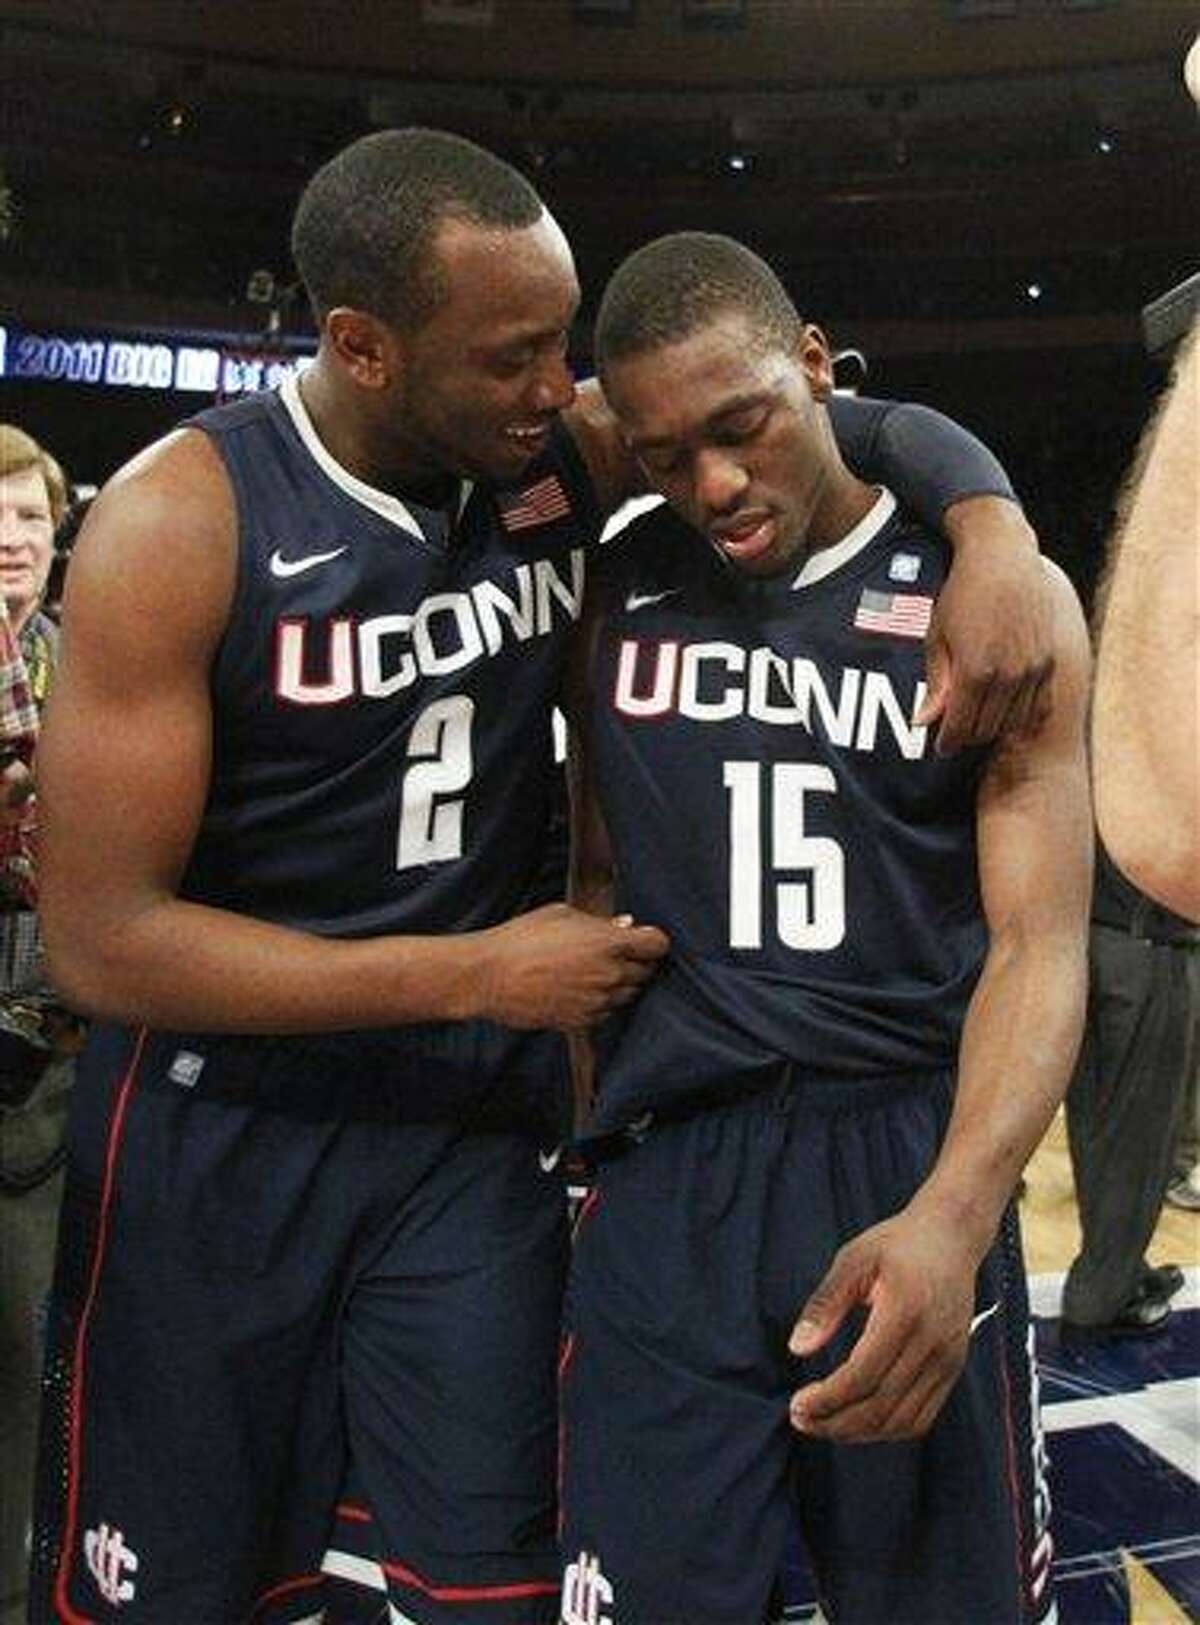 Connecticut's Donnell Beverly (2) celebrates with teammate Kemba Walker (15) after an NCAA college basketball game against Louisville at the Big East Championship Saturday, March 12, 2011, in New York. Connecticut won the game 69-66. (AP Photo/Frank Franklin II)